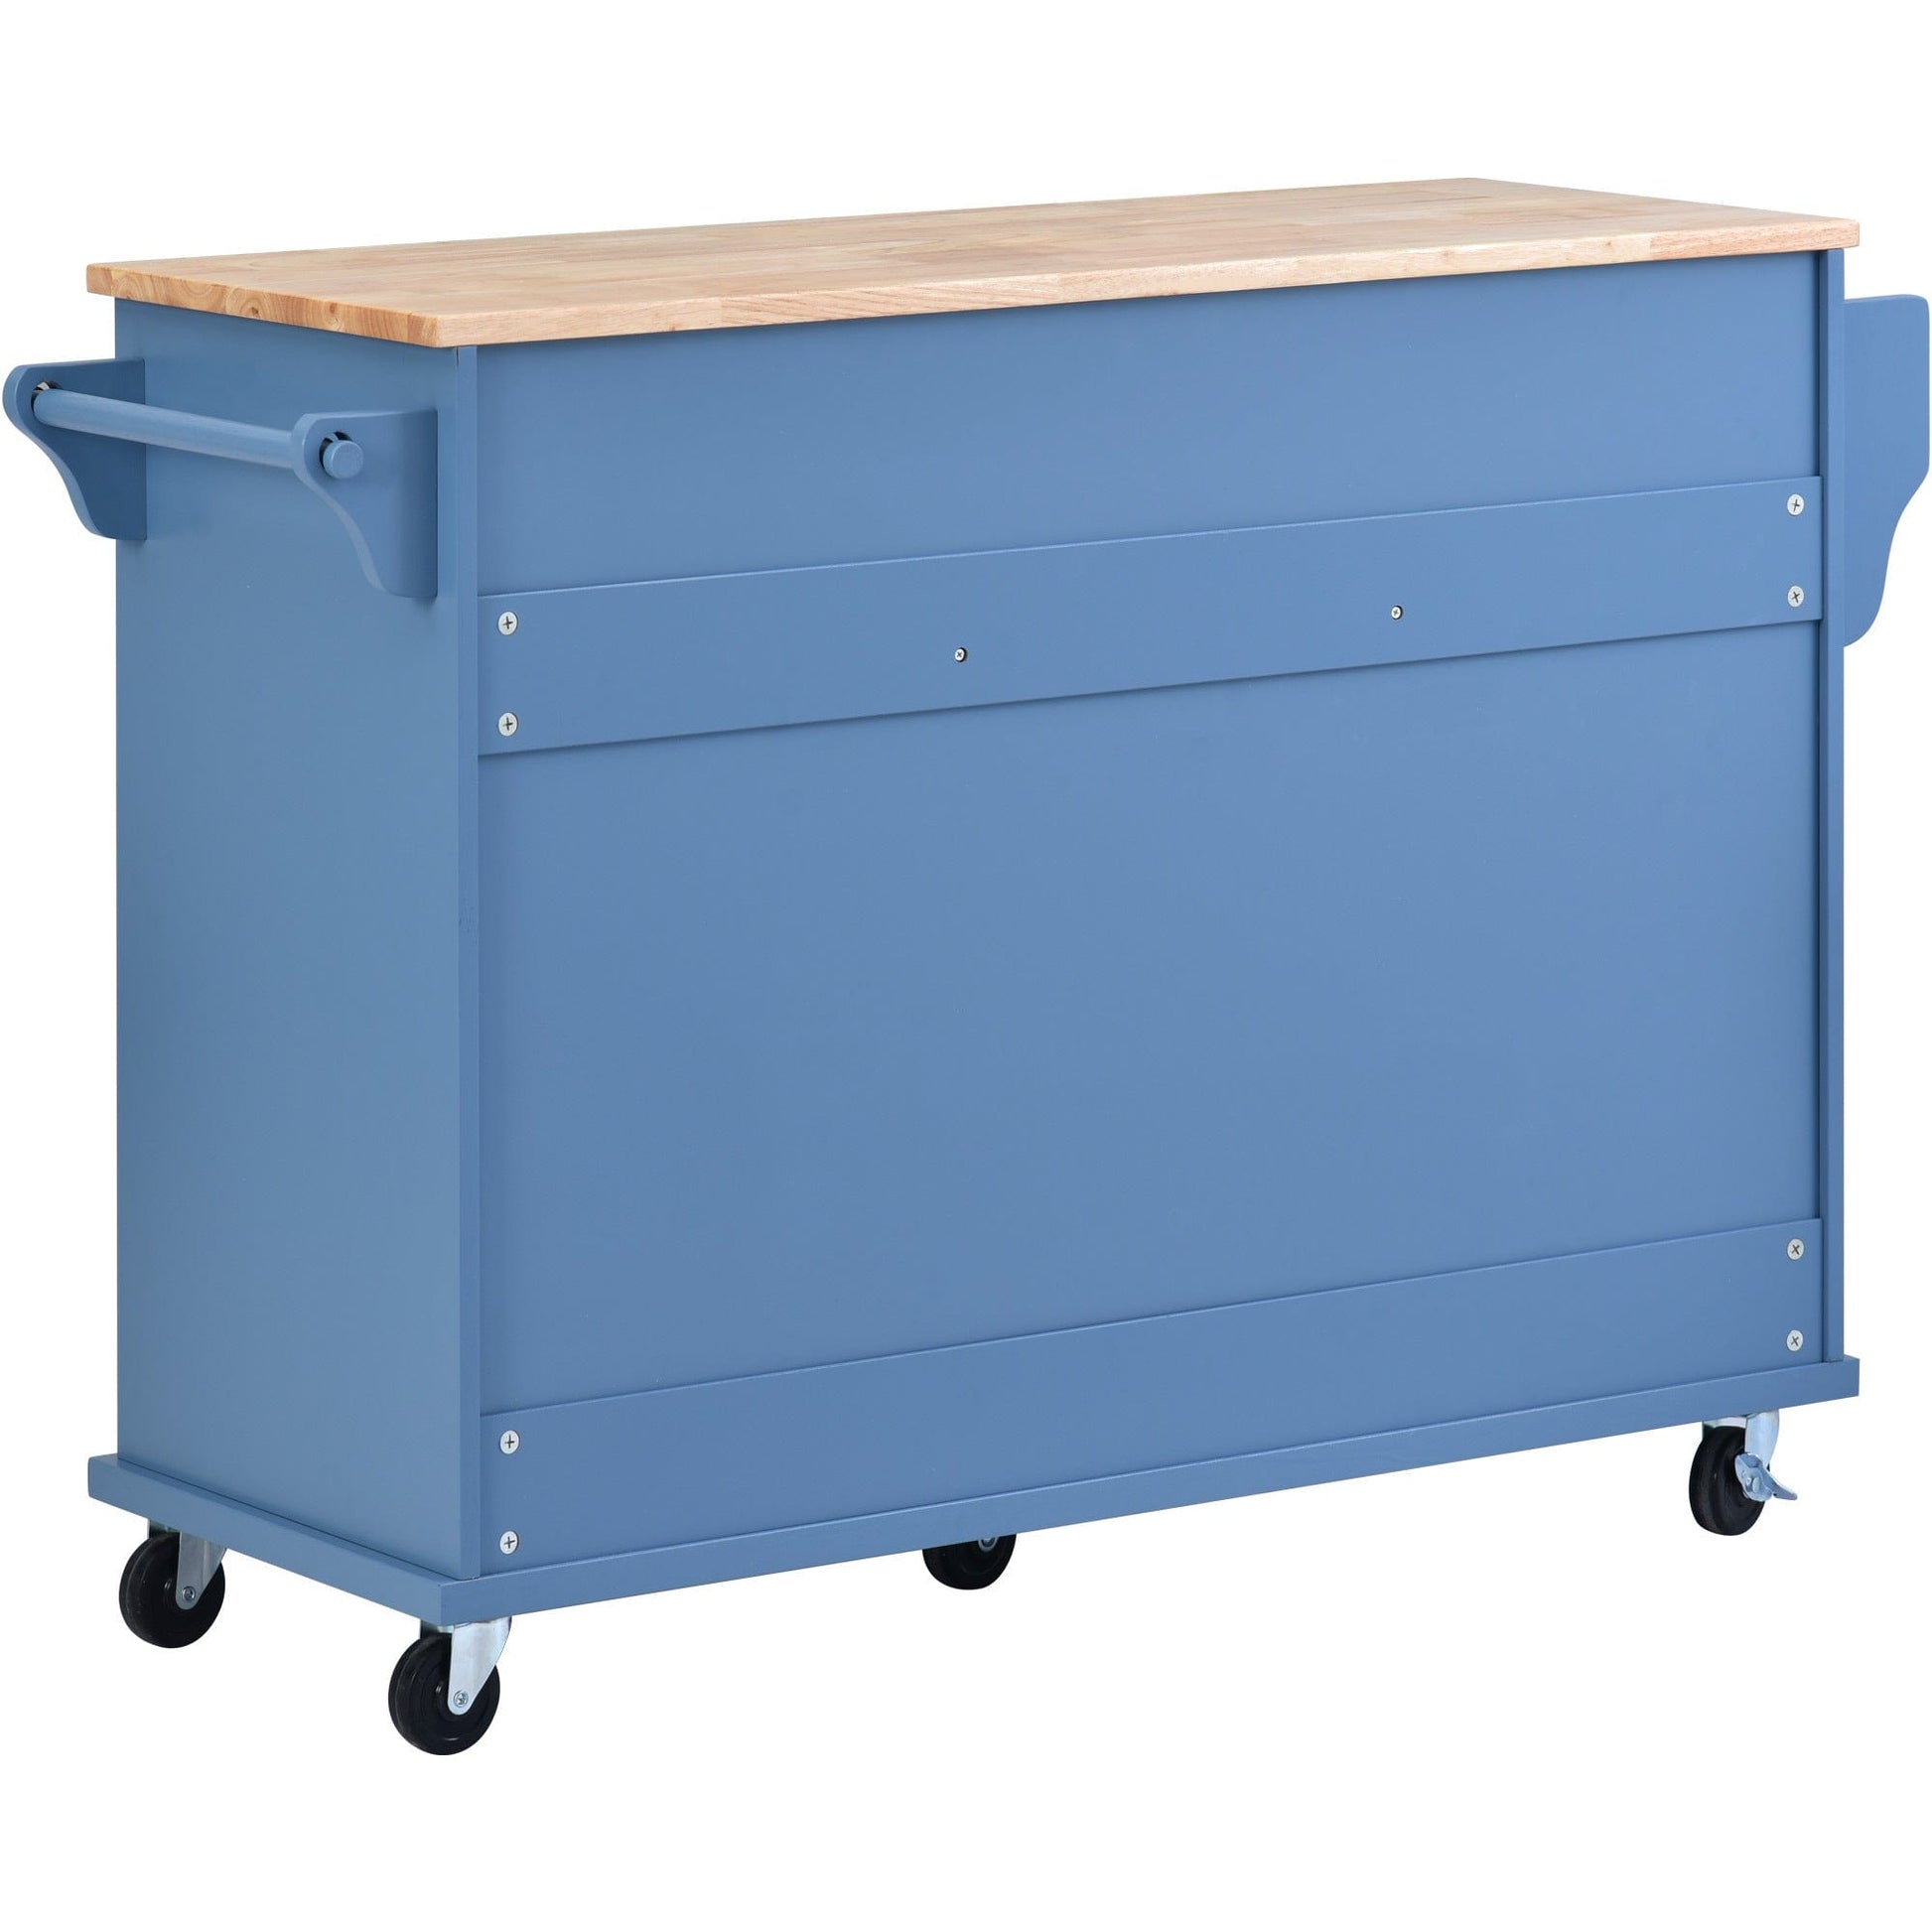 1st Choice Furniture Direct Kitchen Island Cart 1st Choice Functional Rolling Mobile Kitchen Island Cart with Storage